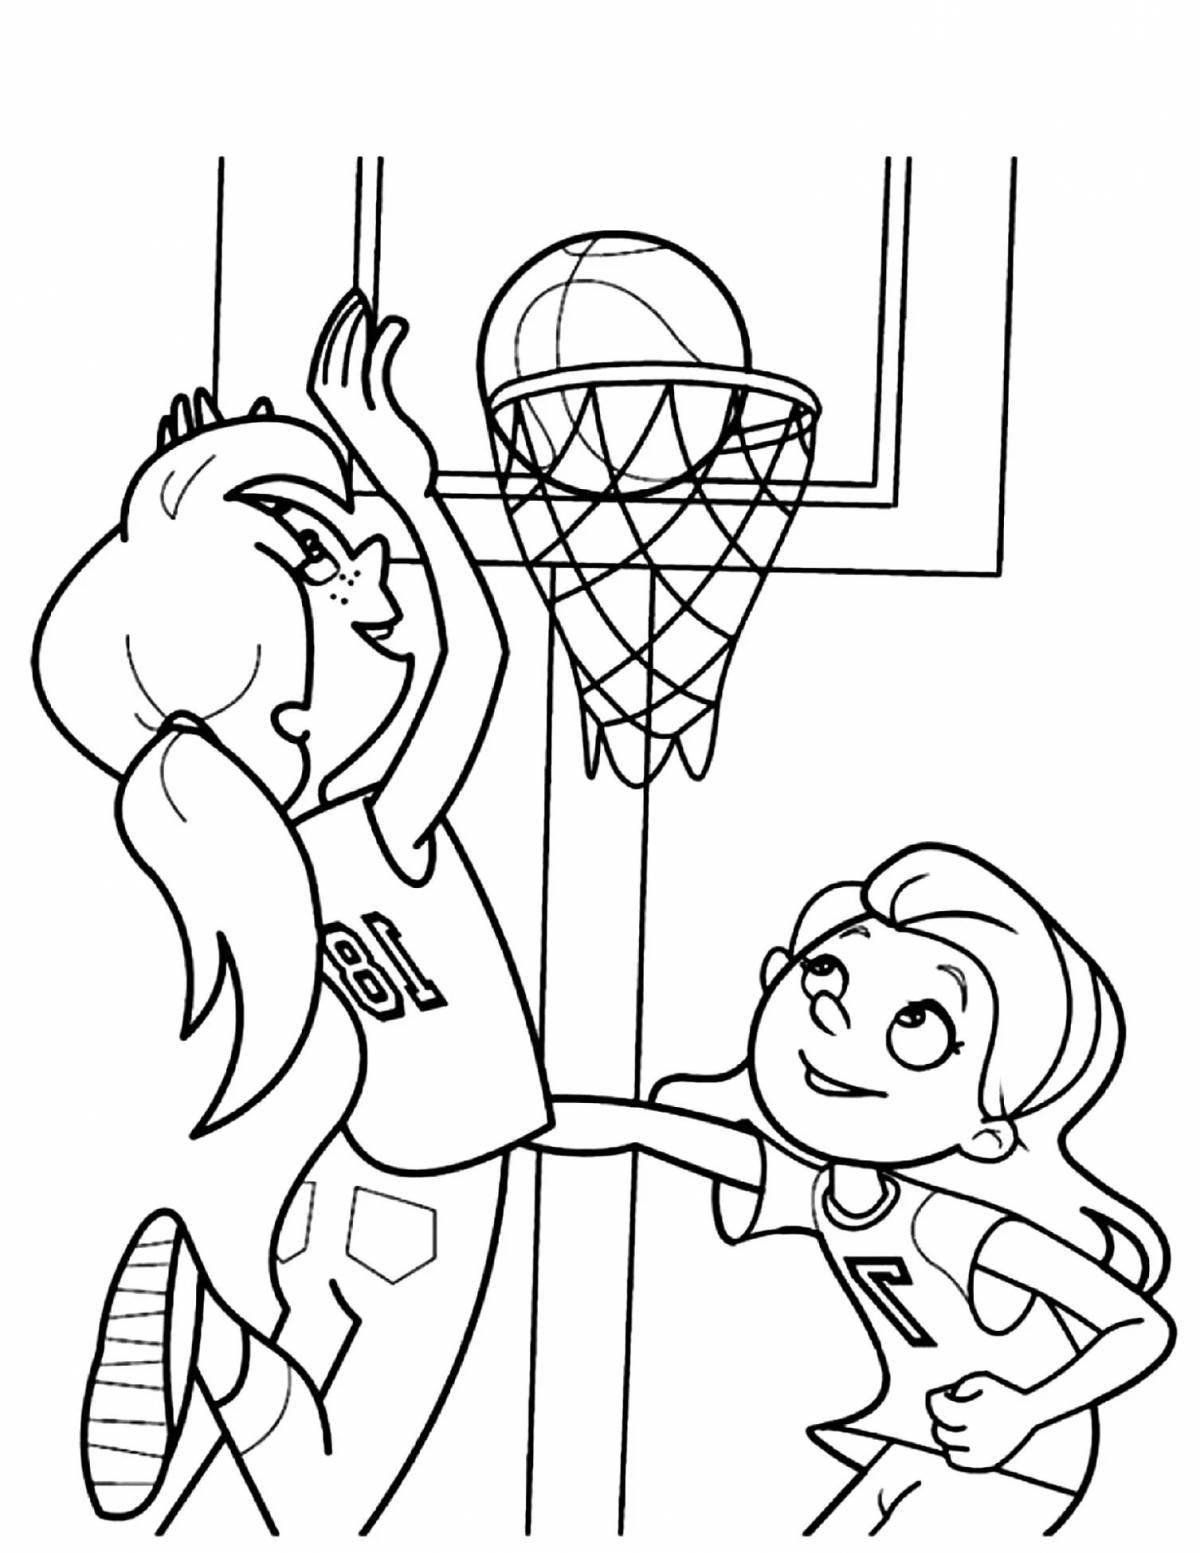 Exciting sports coloring